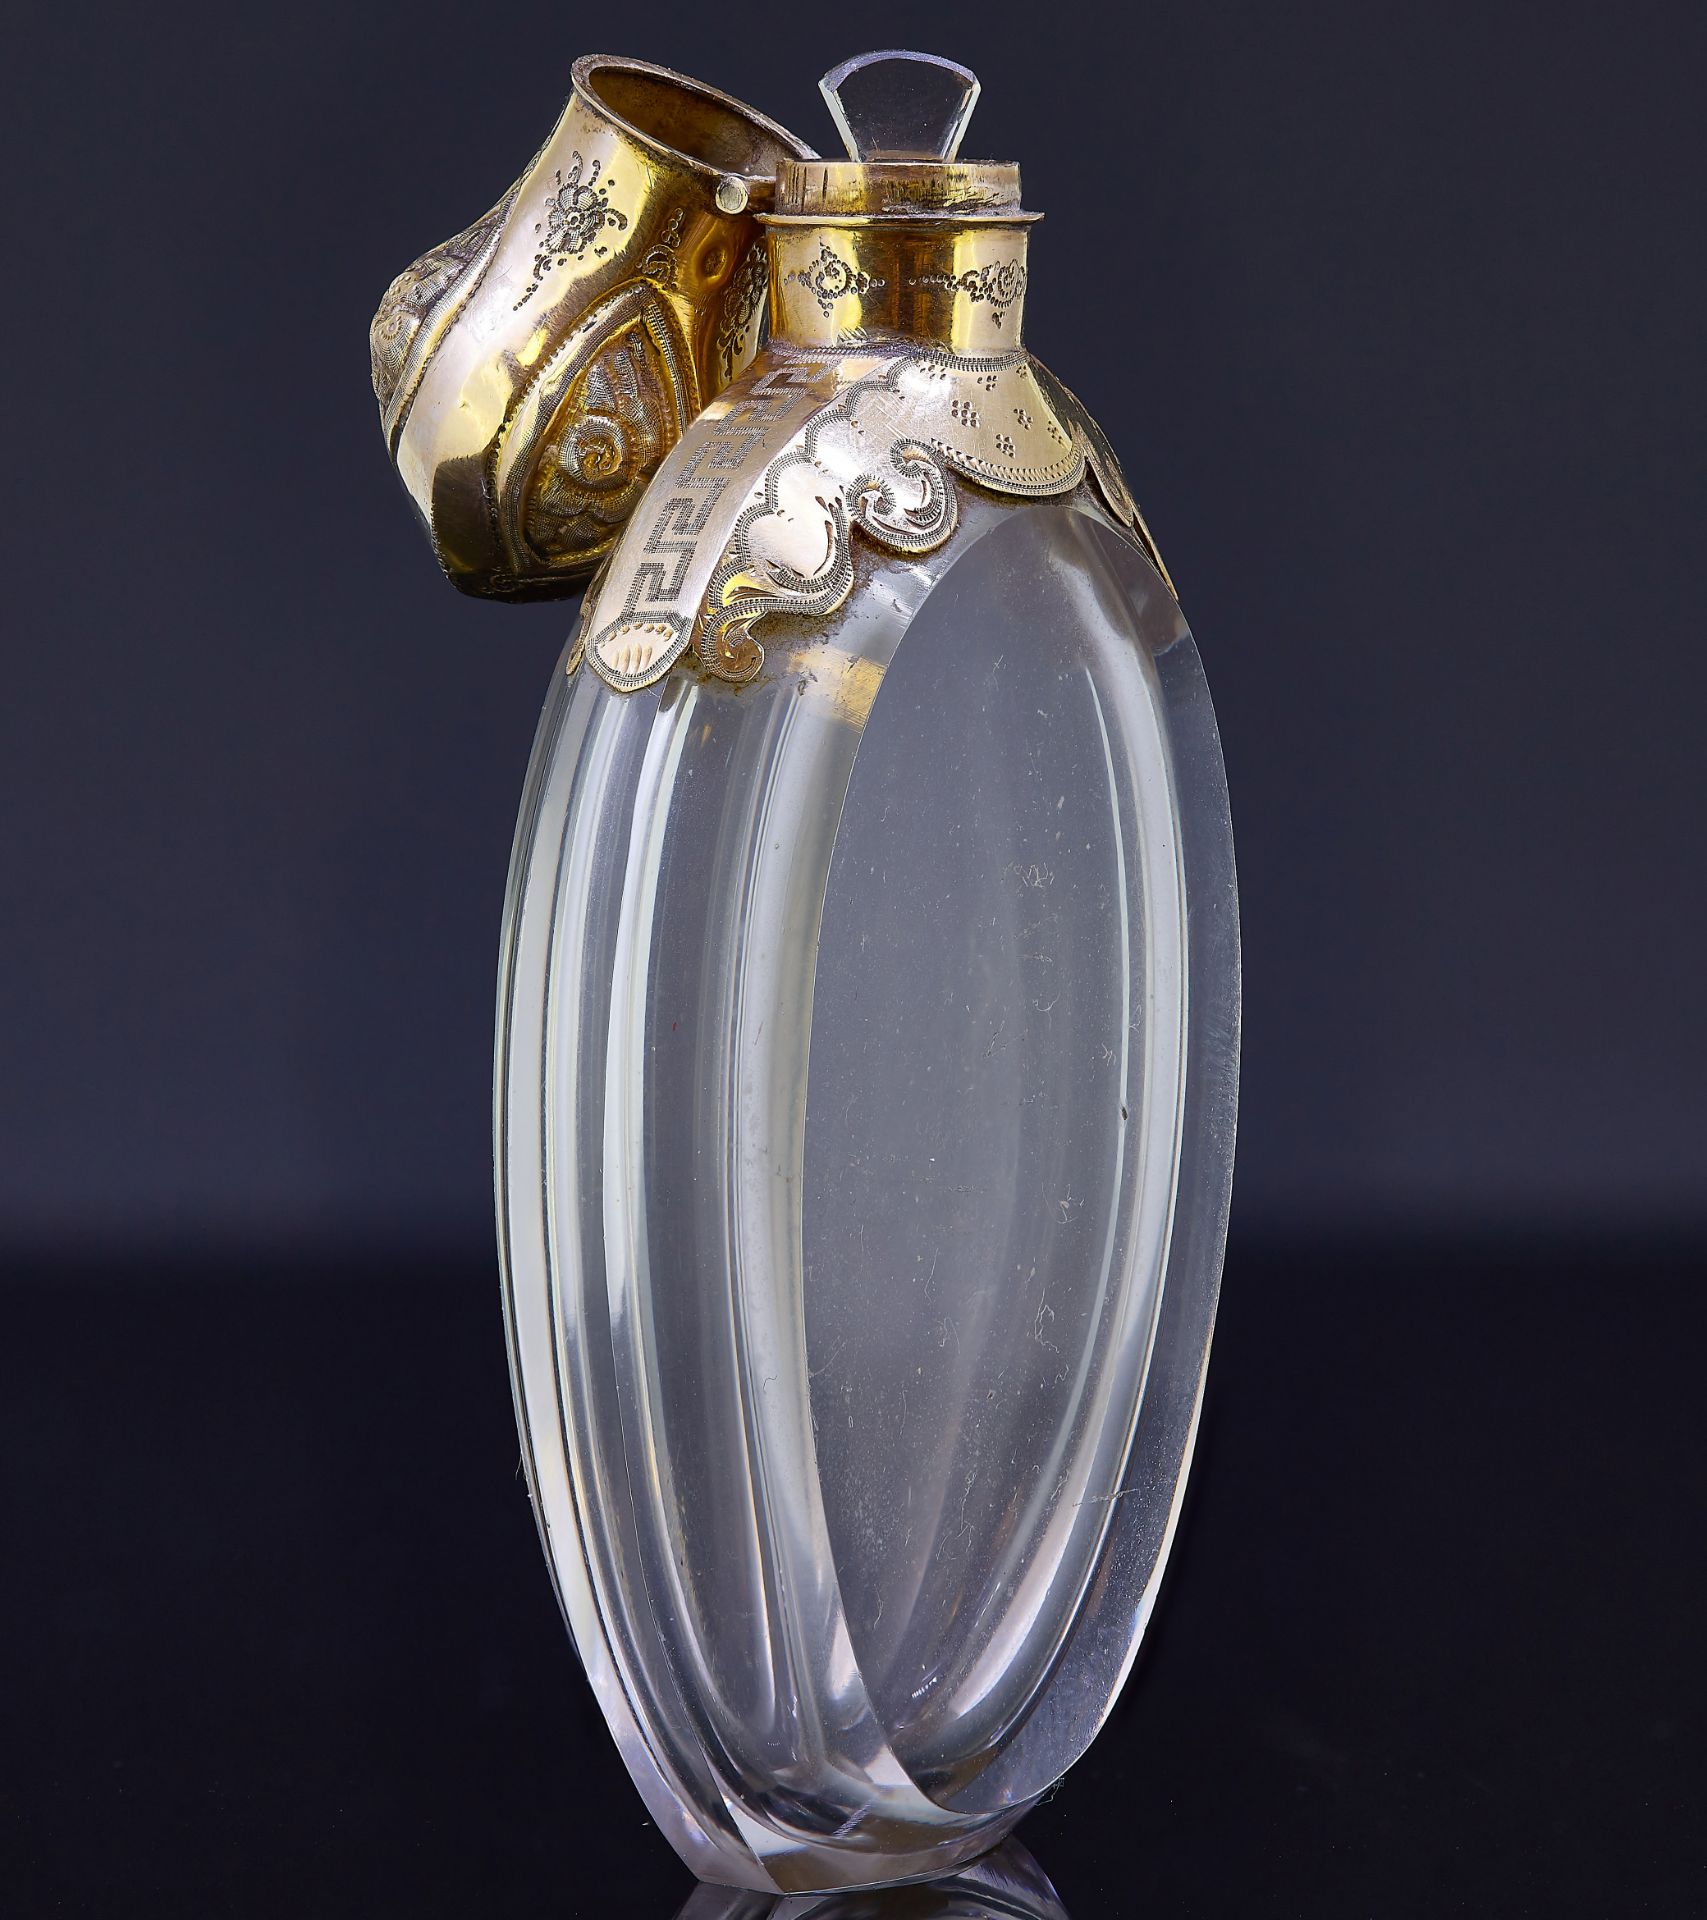 ANTIQUE VICTORIAN ROCK CRYSTAL PERFUME BOTTLE WITH GOLD MOUNTS - Image 2 of 2